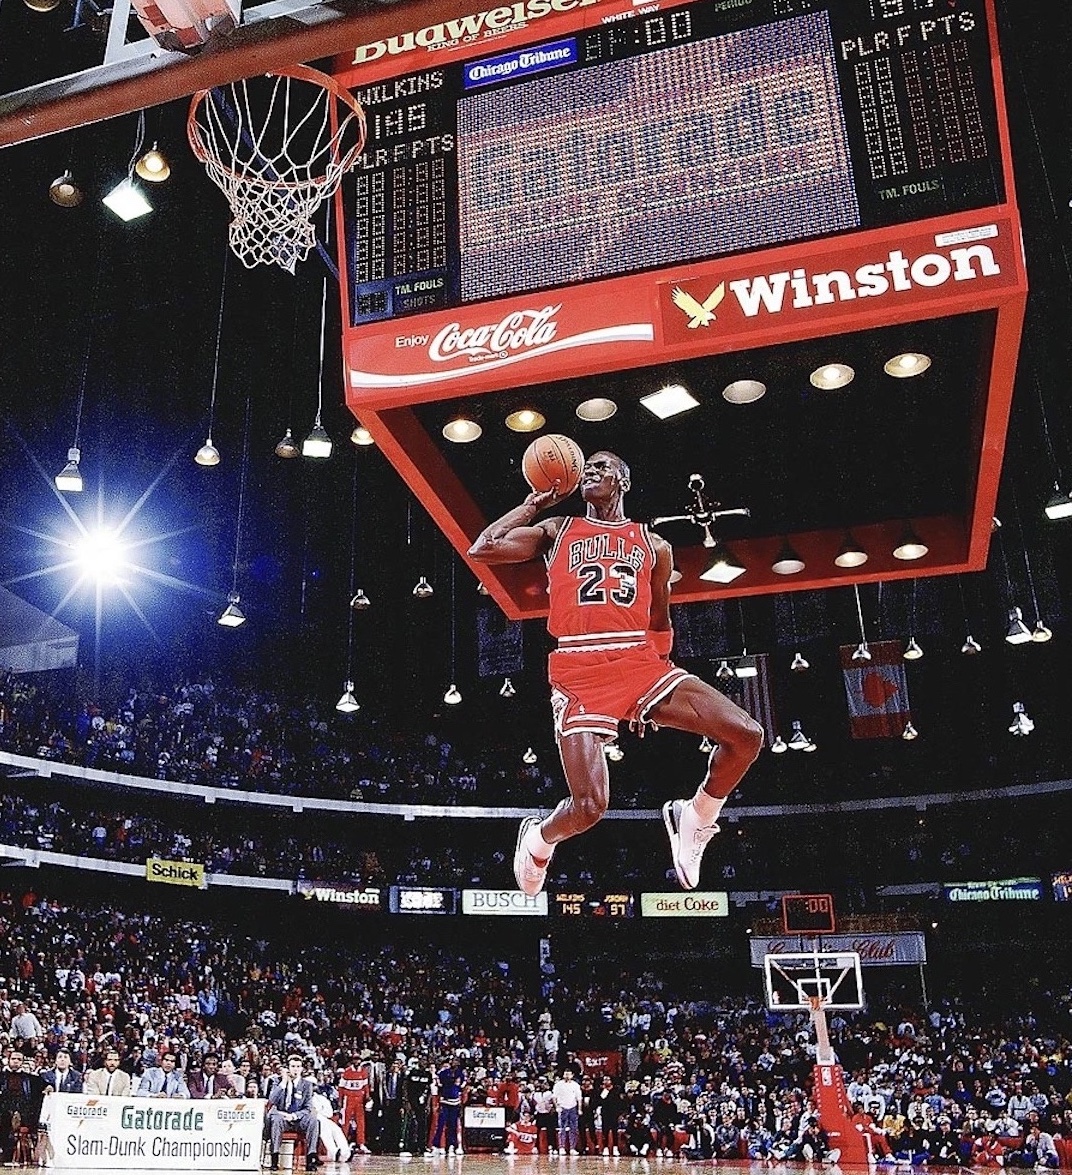 Most iconic fascinating sports photos - iconic sports - Schick Gatorade Slam Dunk Championship Duawei Wilkins 195 Perfpts 88 Thala S 10 CocaCola Busch 00 And Ontrenne Famles 23 88 Tmfal Winston Plrf Pts 88 Coke Flab Dr